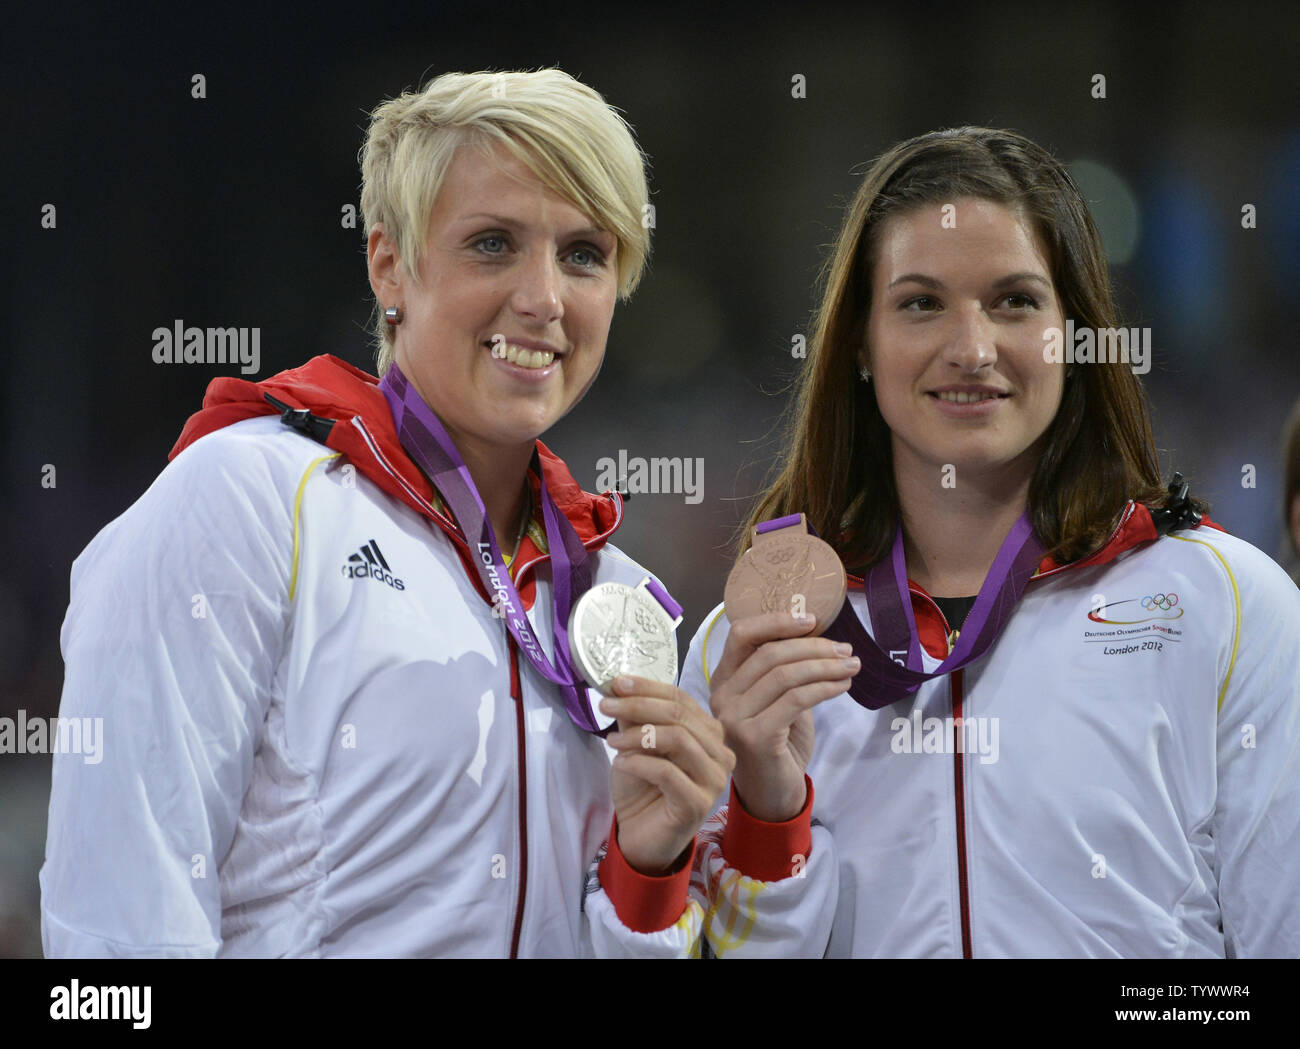 Silver Medalist Christina Obergfoll of Germany (L)  and teammate Linda Stahl hold their medals during the Victory Ceremony for the Women's Javelin Throw at the London 2012 Summer Olympics on August 10, 2012 in Stratford, London. Obergfoll hit a mark of 65.16 and Stahl threw a season-best 64.91 in the final.      UPI/Brian Kersey Stock Photo